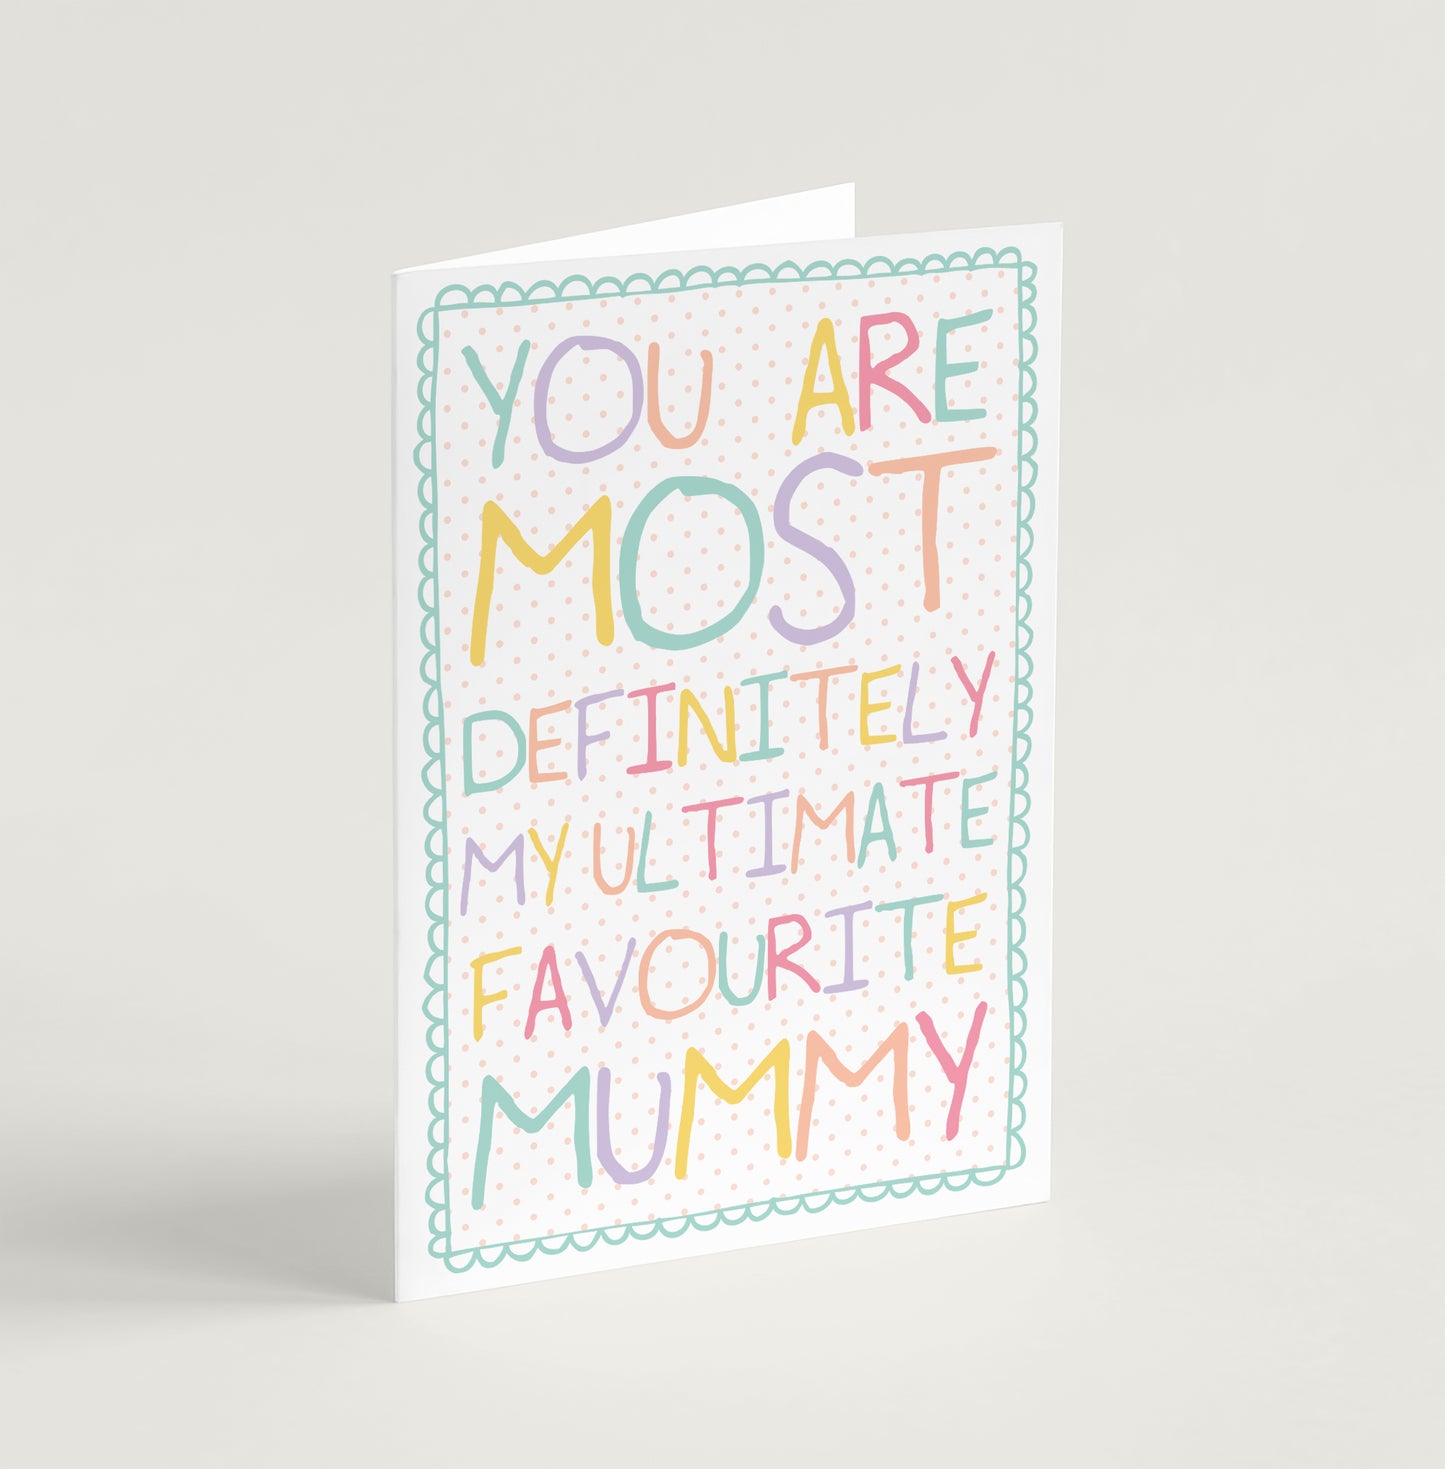 'You are most definitely my ultimate favourite mummy' Mother's Day Card